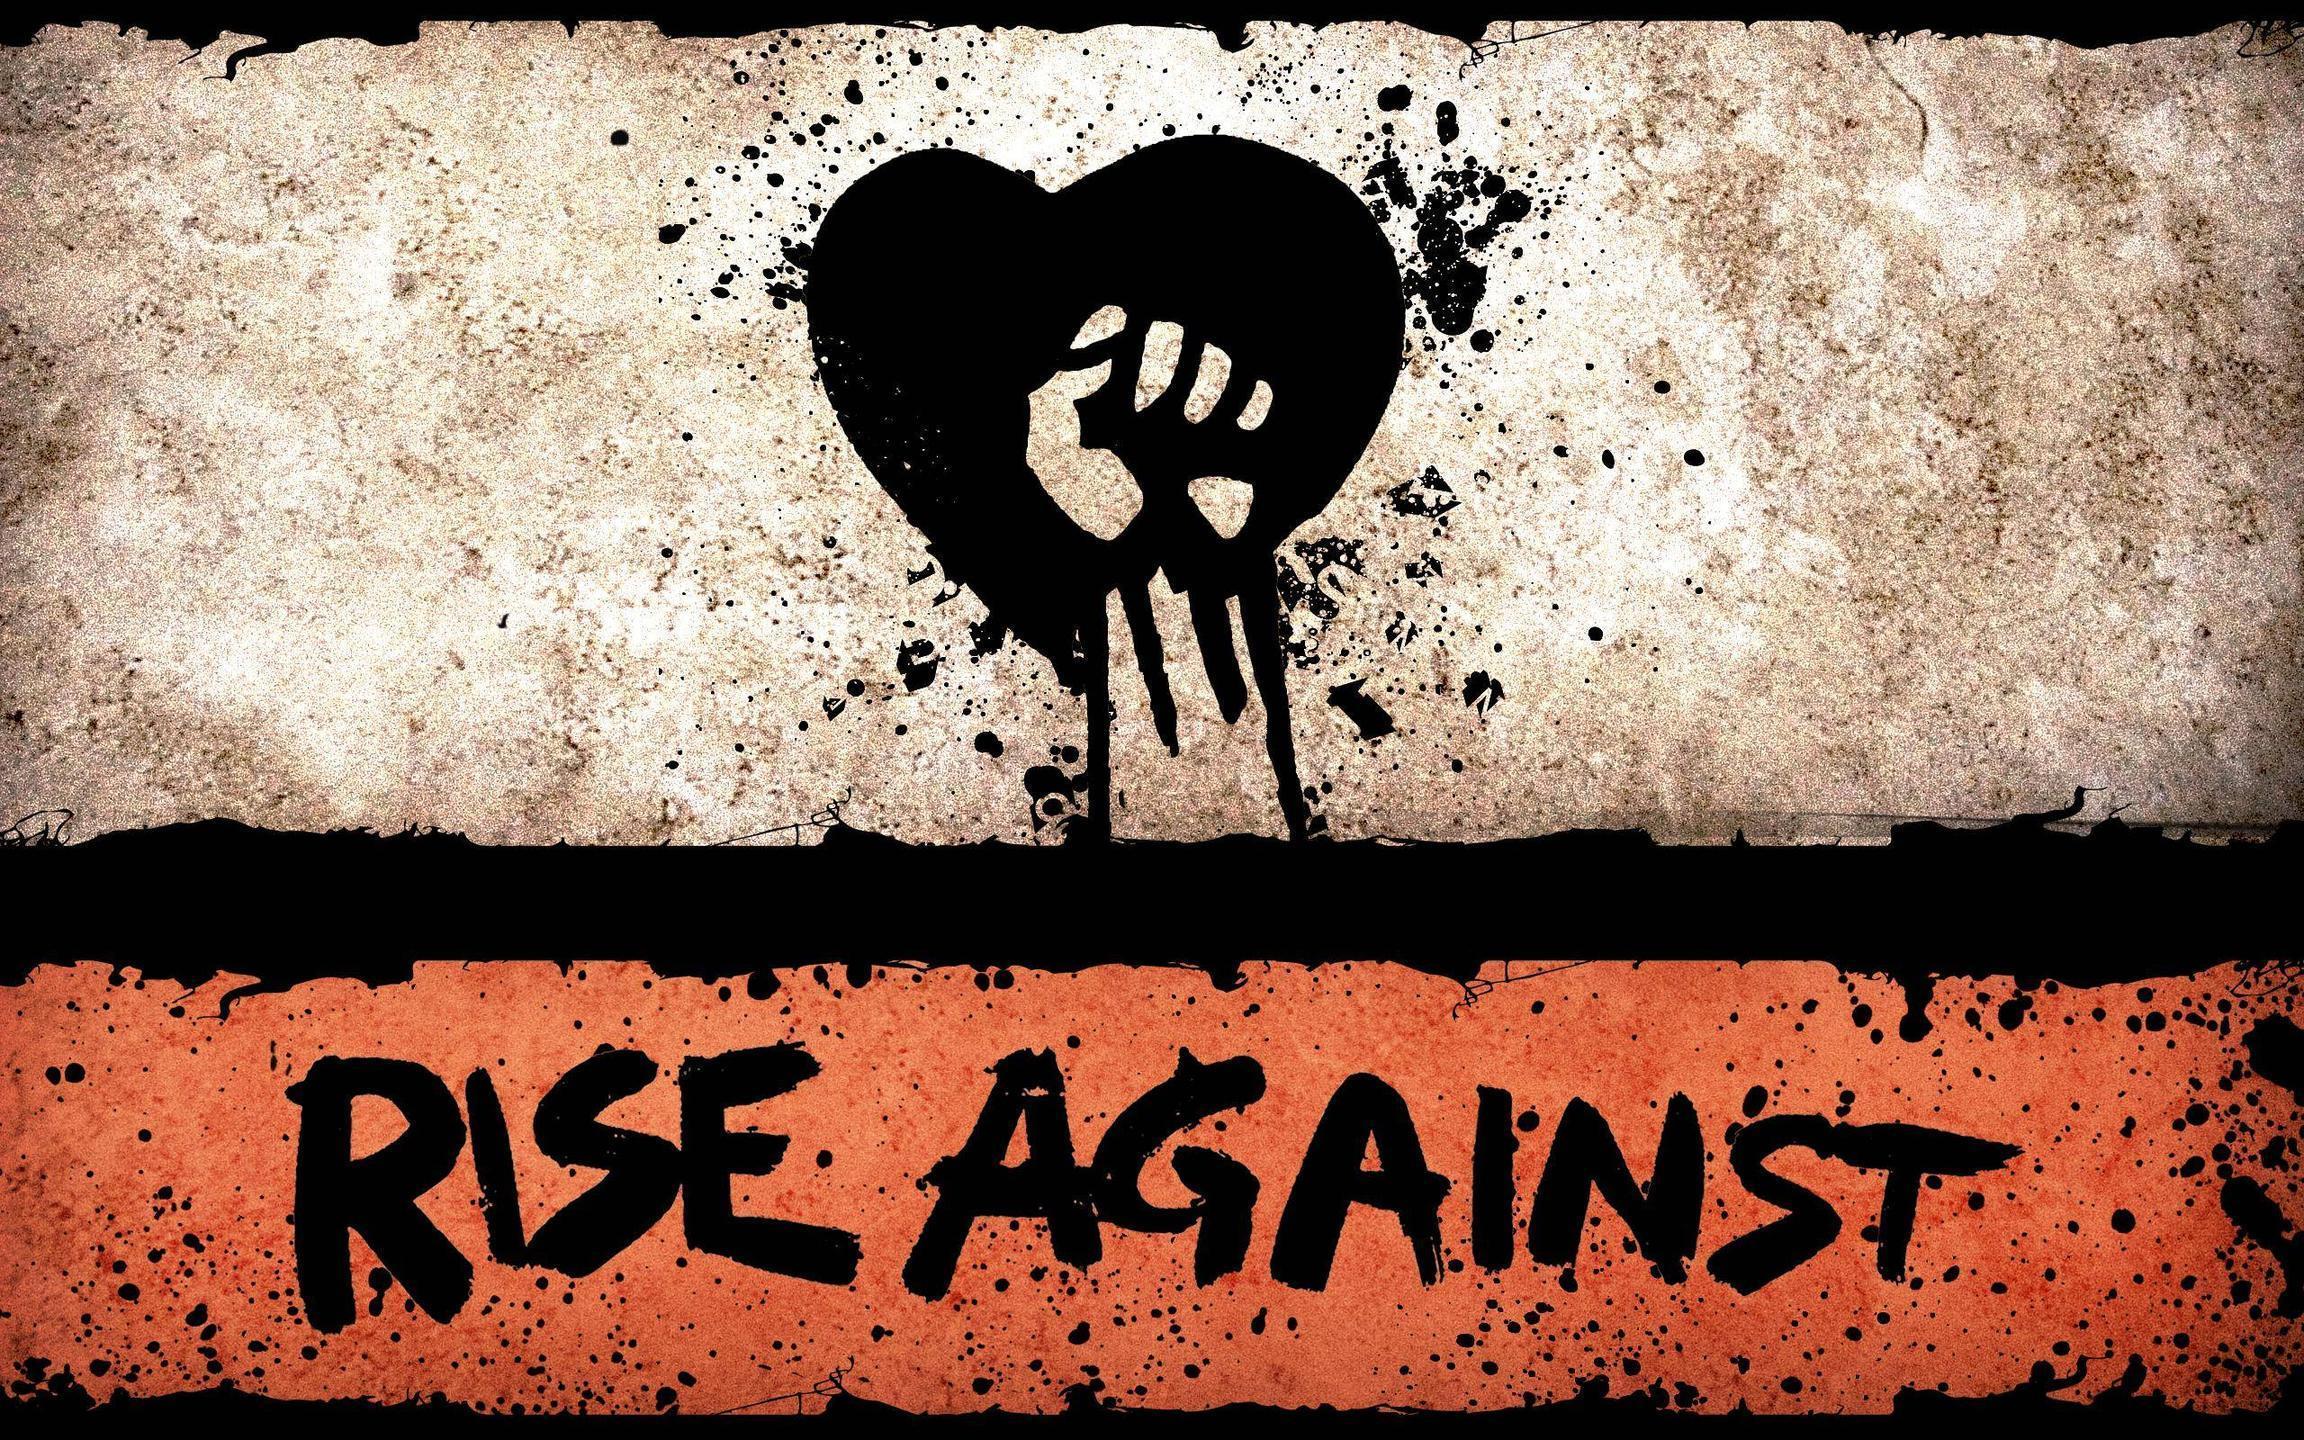 Download Rise Against Wallpaper 9981 2560x1600 px High Resolution